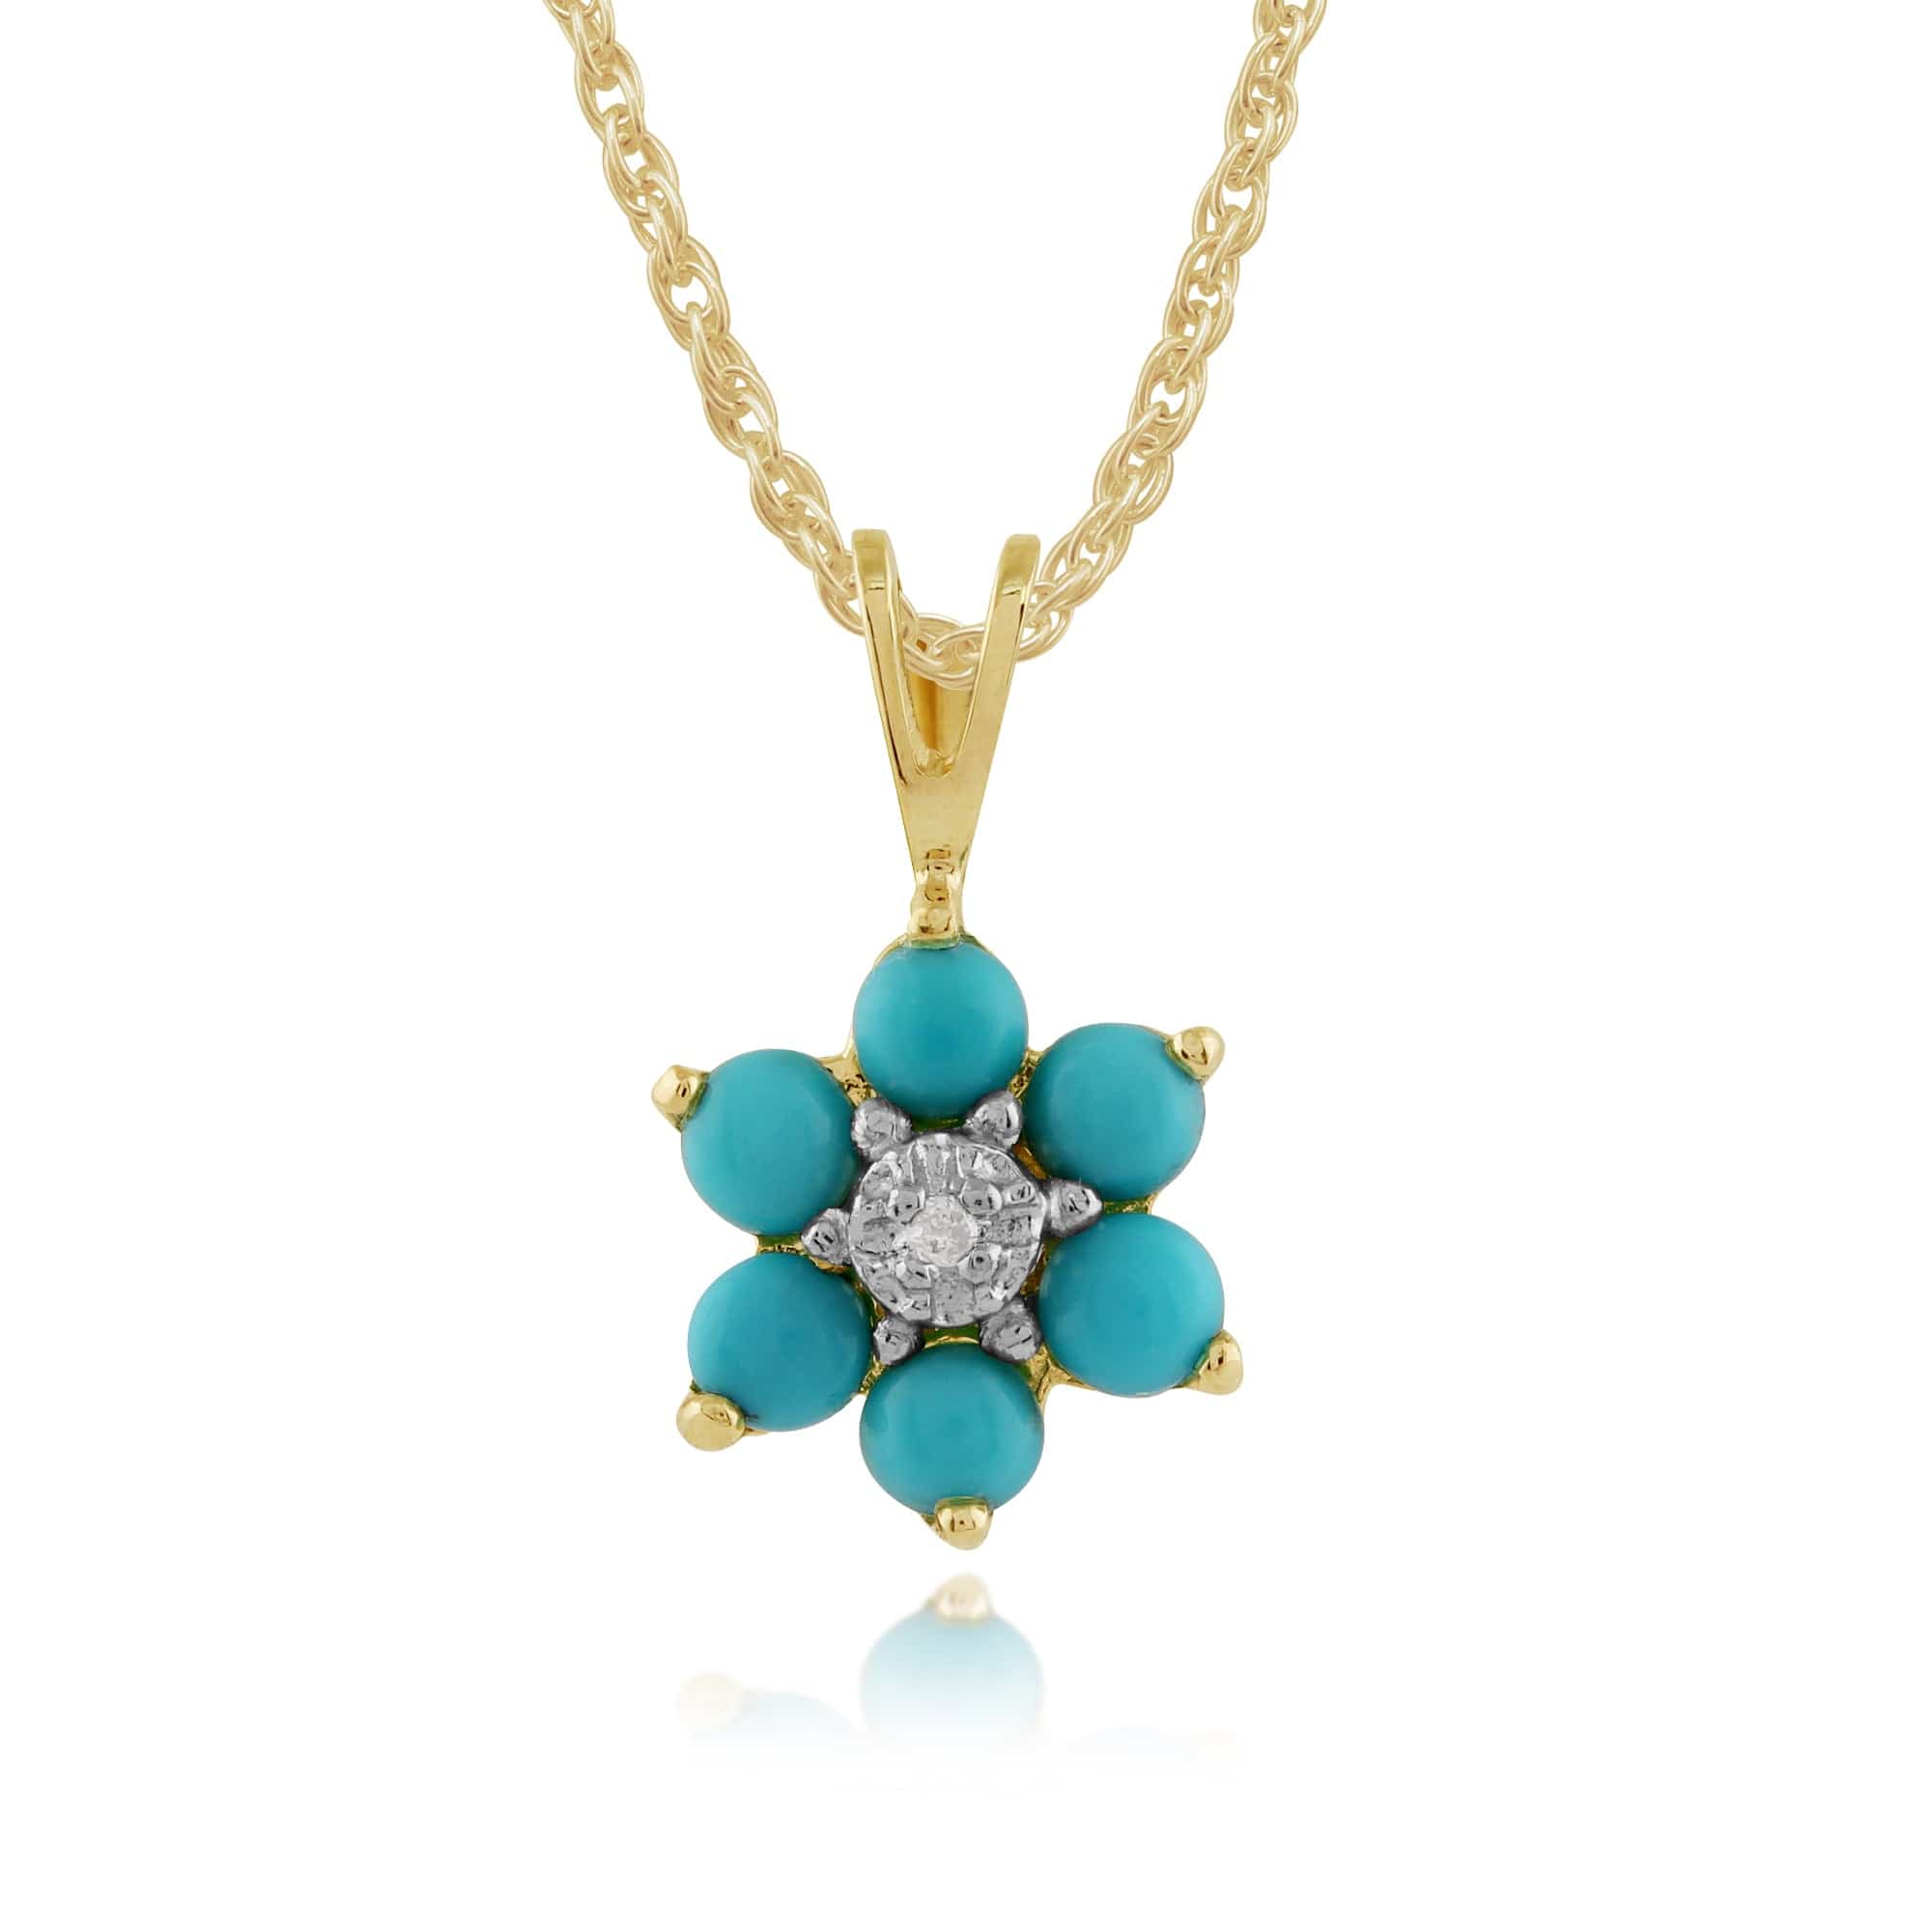 Photos - Pendant / Choker Necklace Floral Round Turquoise & Diamond Pendant in 9ct Yellow Gold